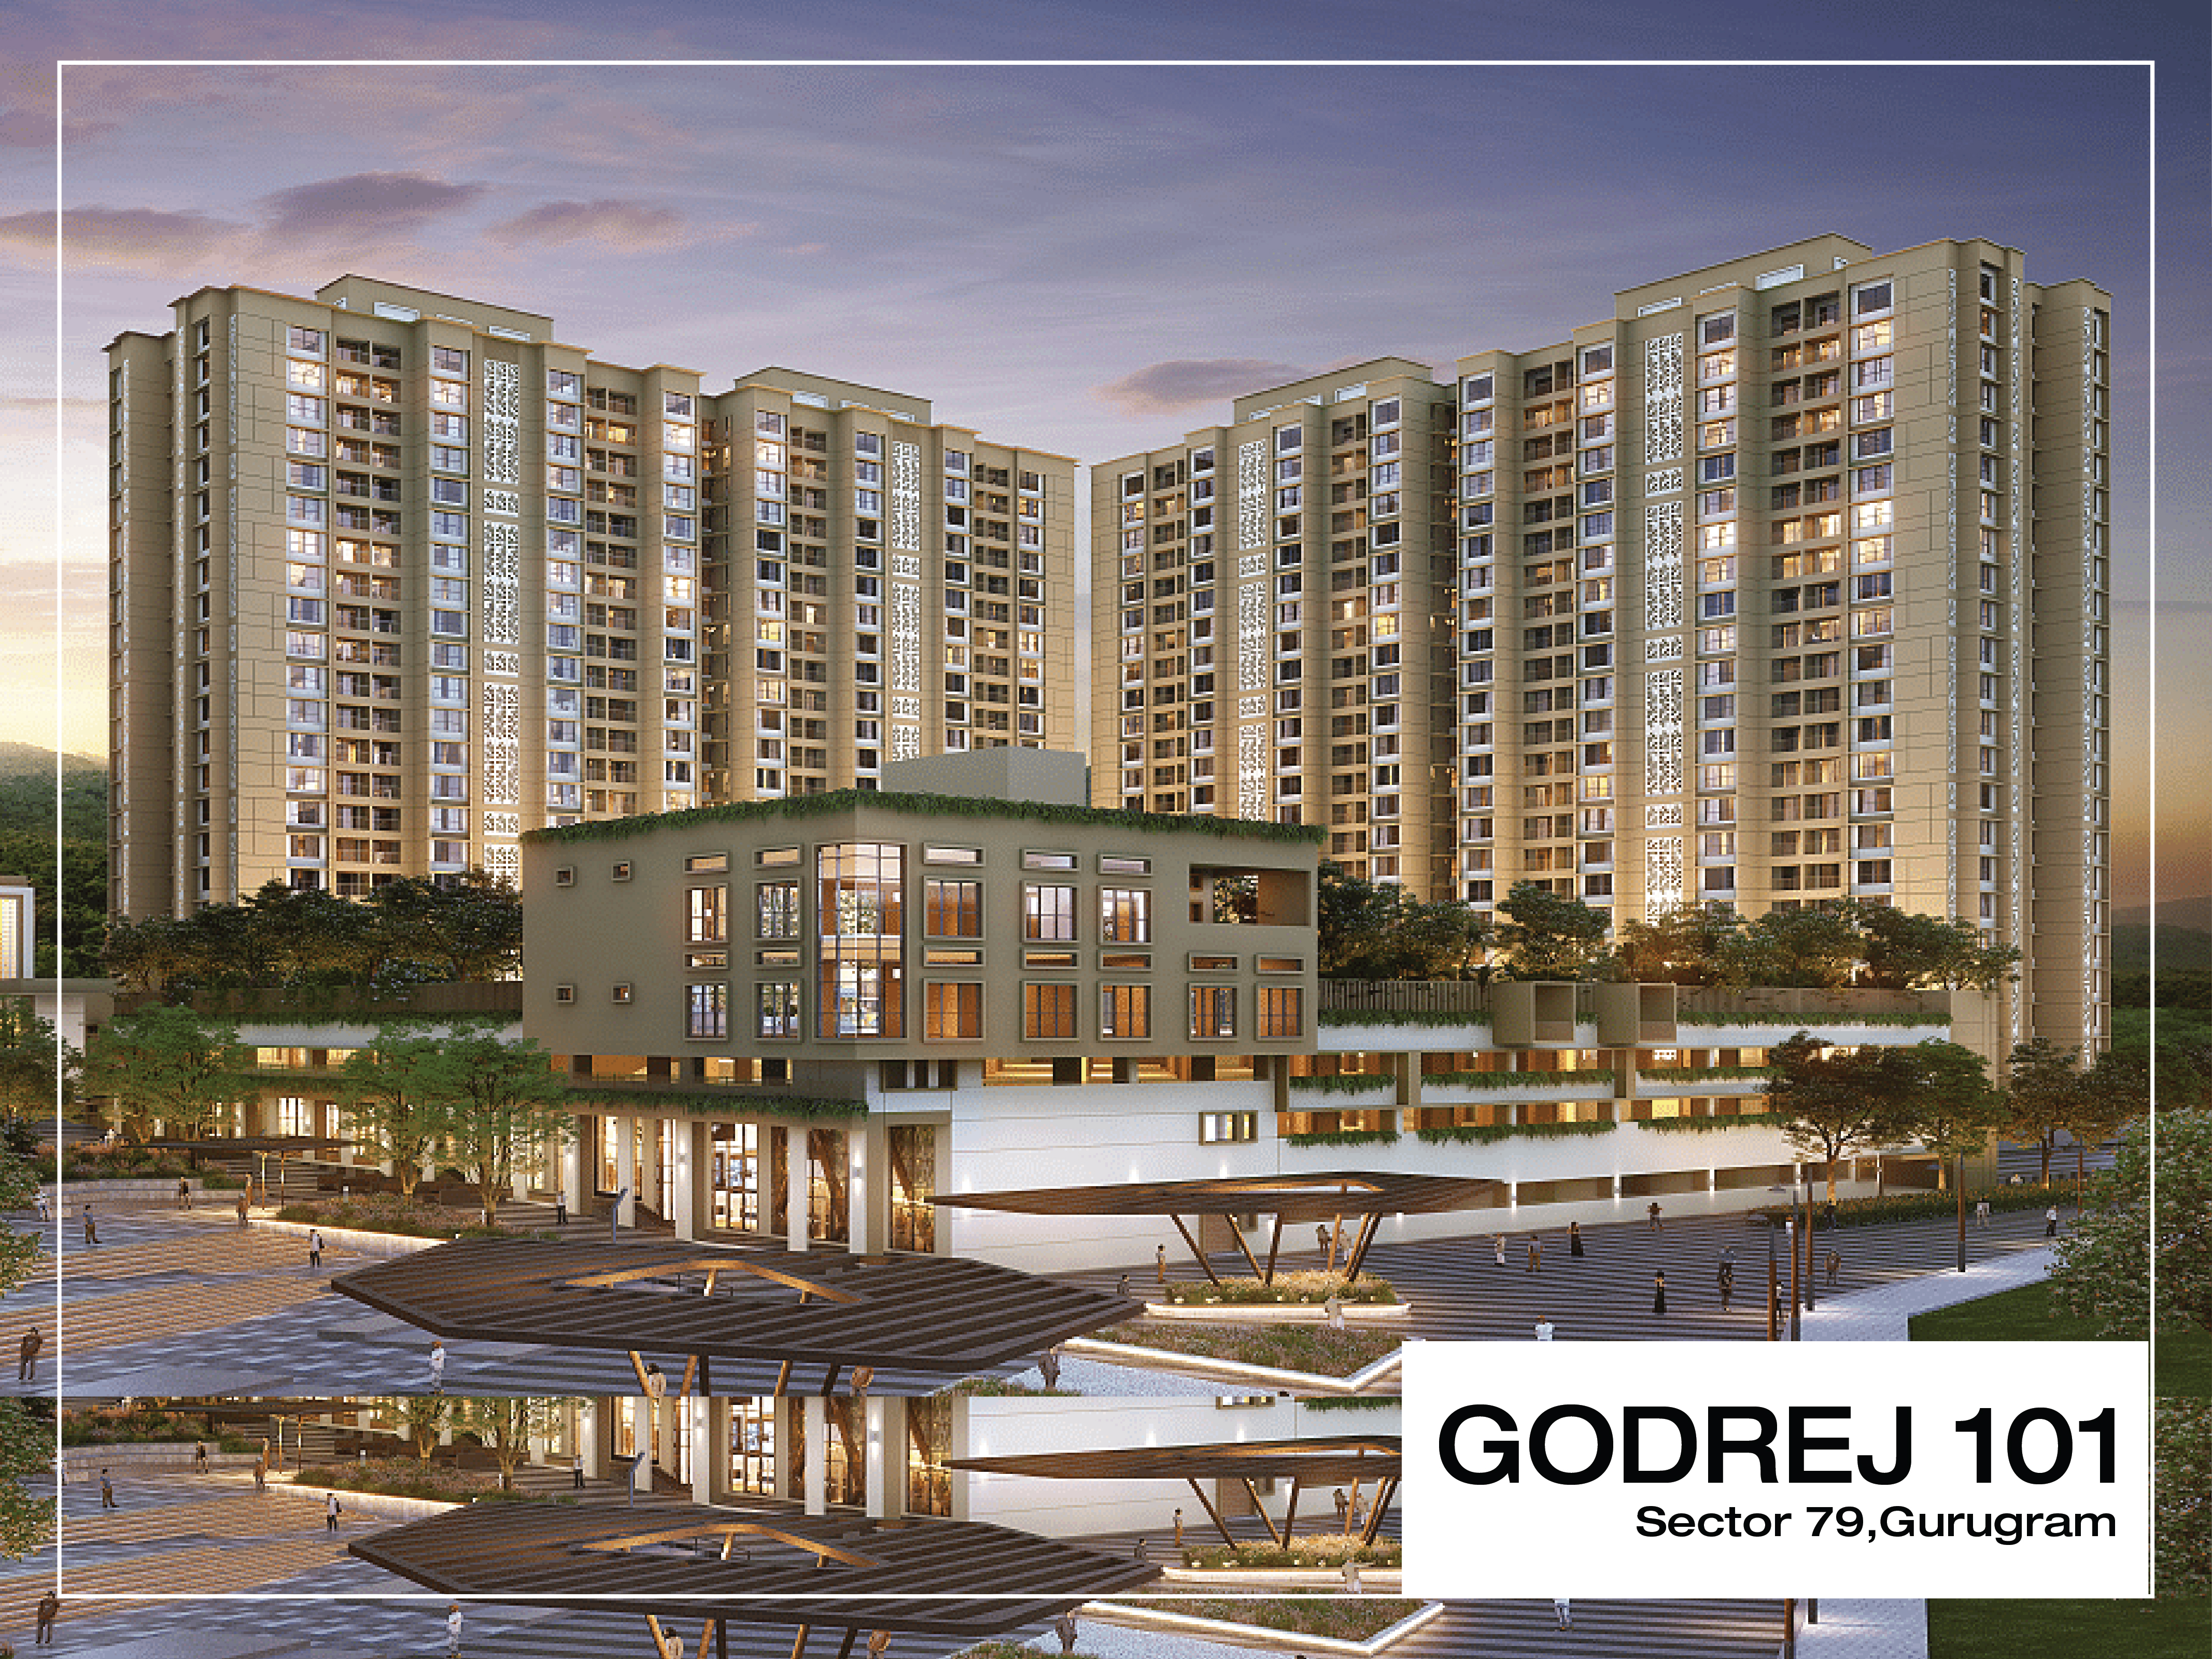 New Godrej 101 Ultra Luxury Residential Flats in Prime Location Sector 79, Gurgaon